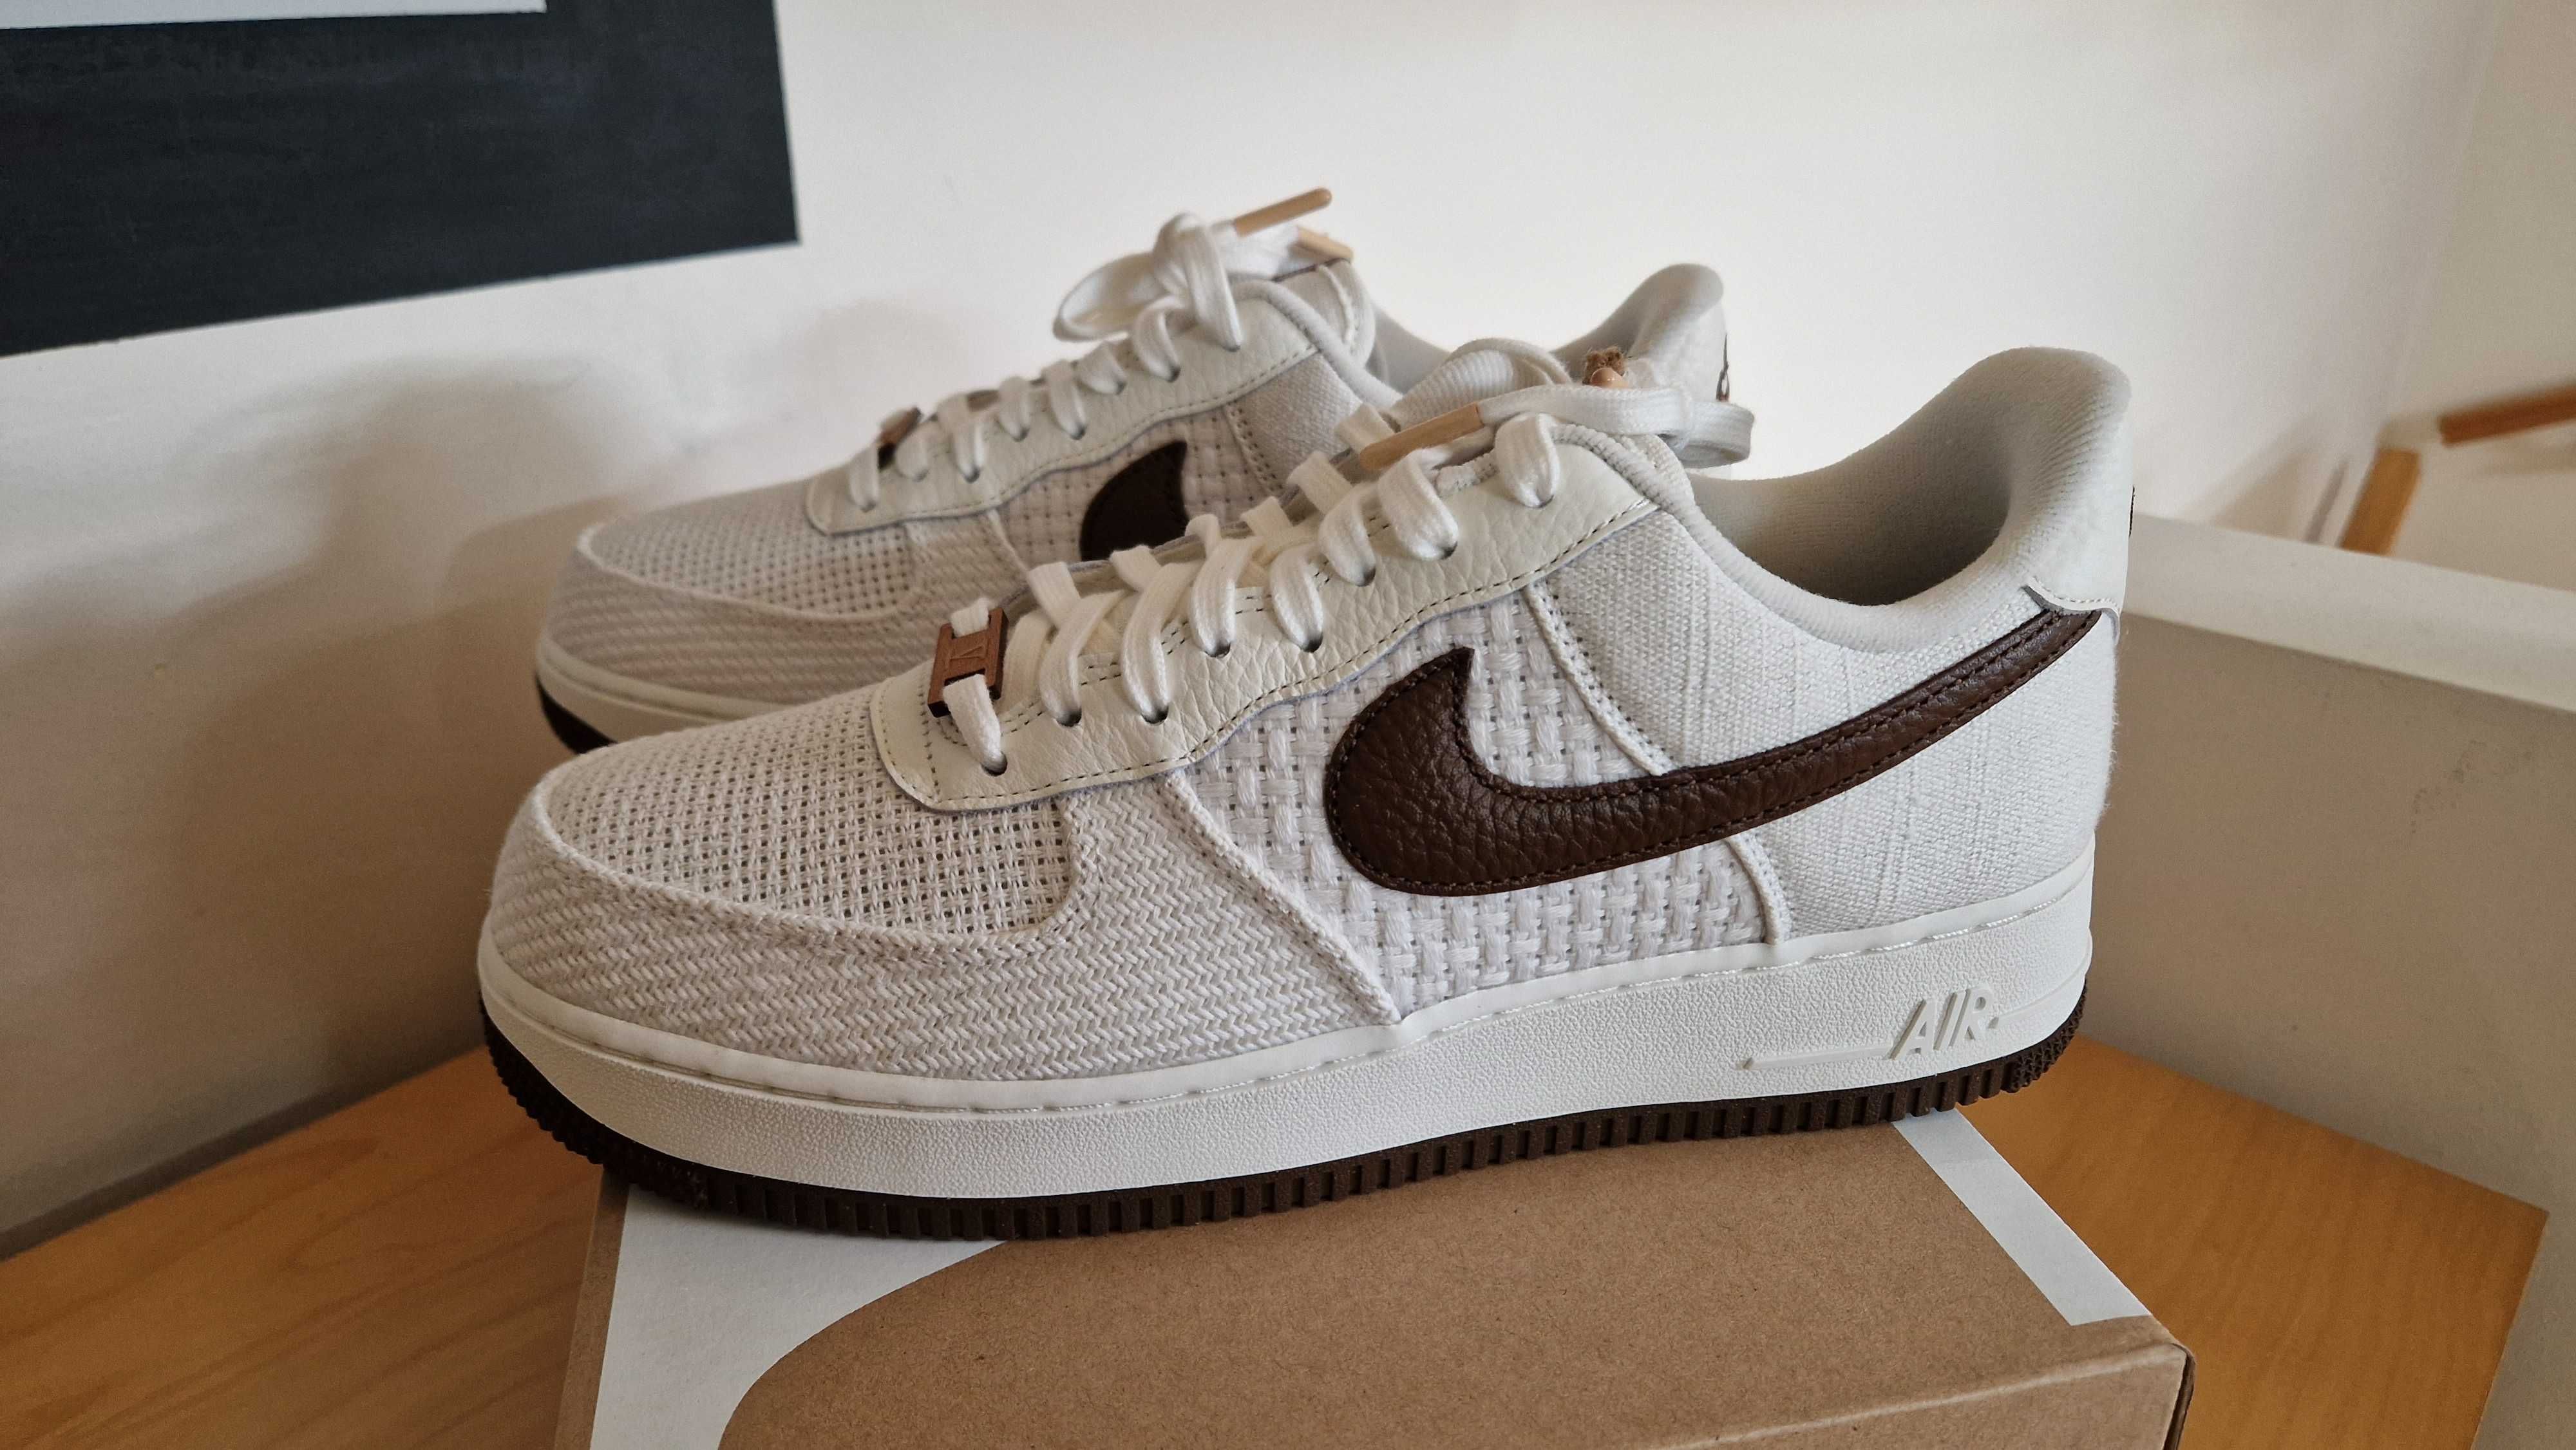 Buty Nike Air Force 1 SNKRS 42,5 EUR = 9 US 9US